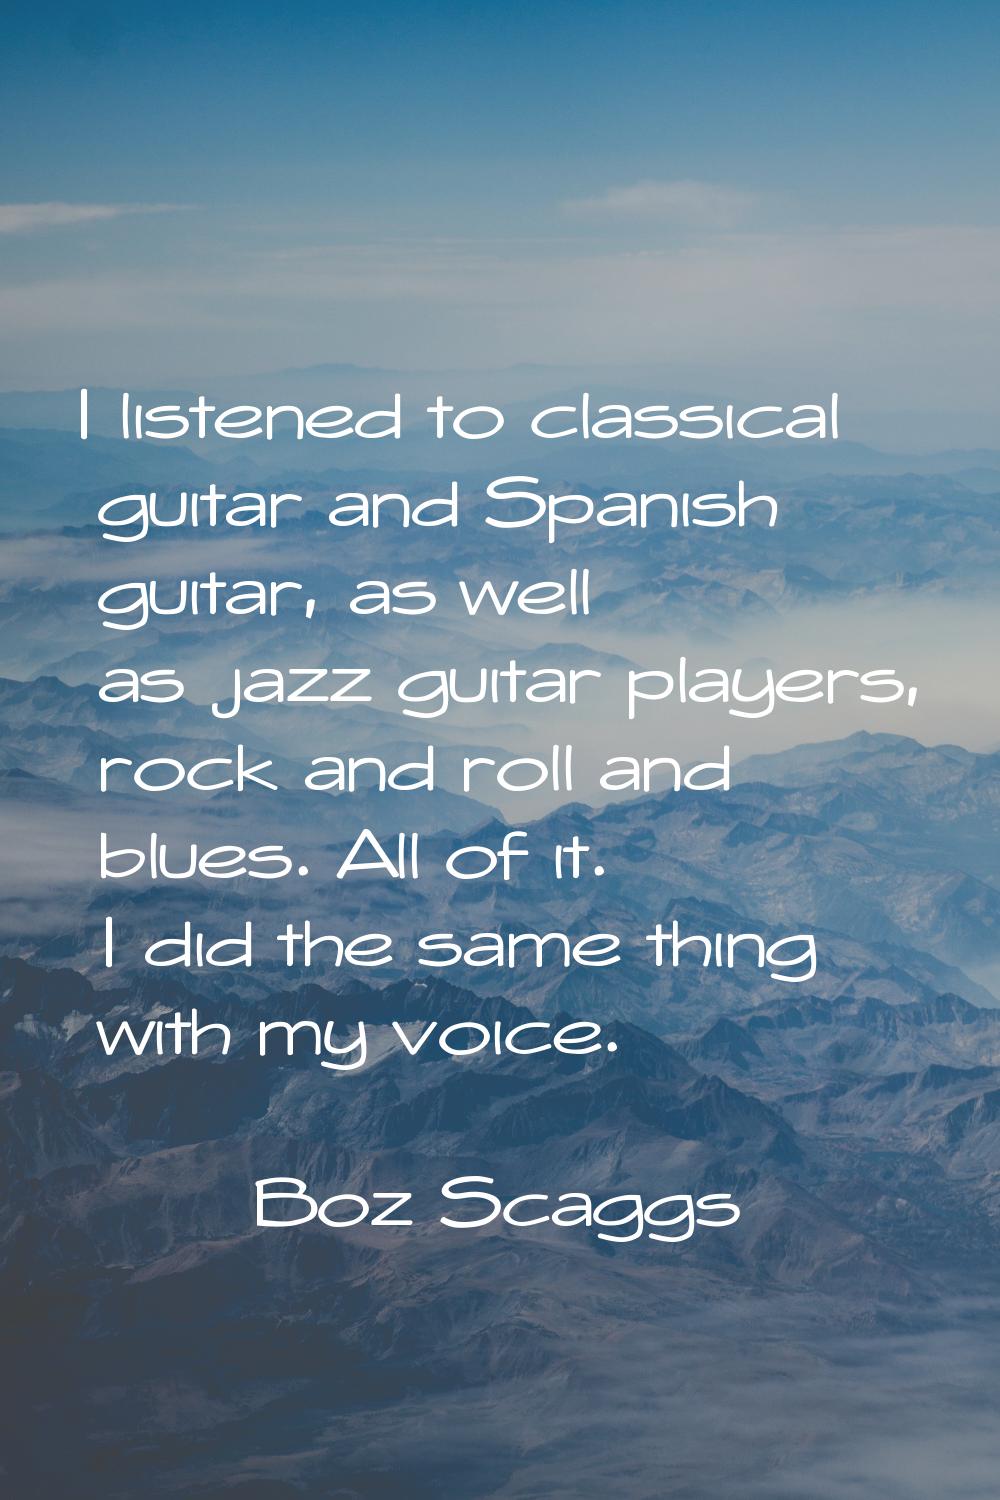 I listened to classical guitar and Spanish guitar, as well as jazz guitar players, rock and roll an